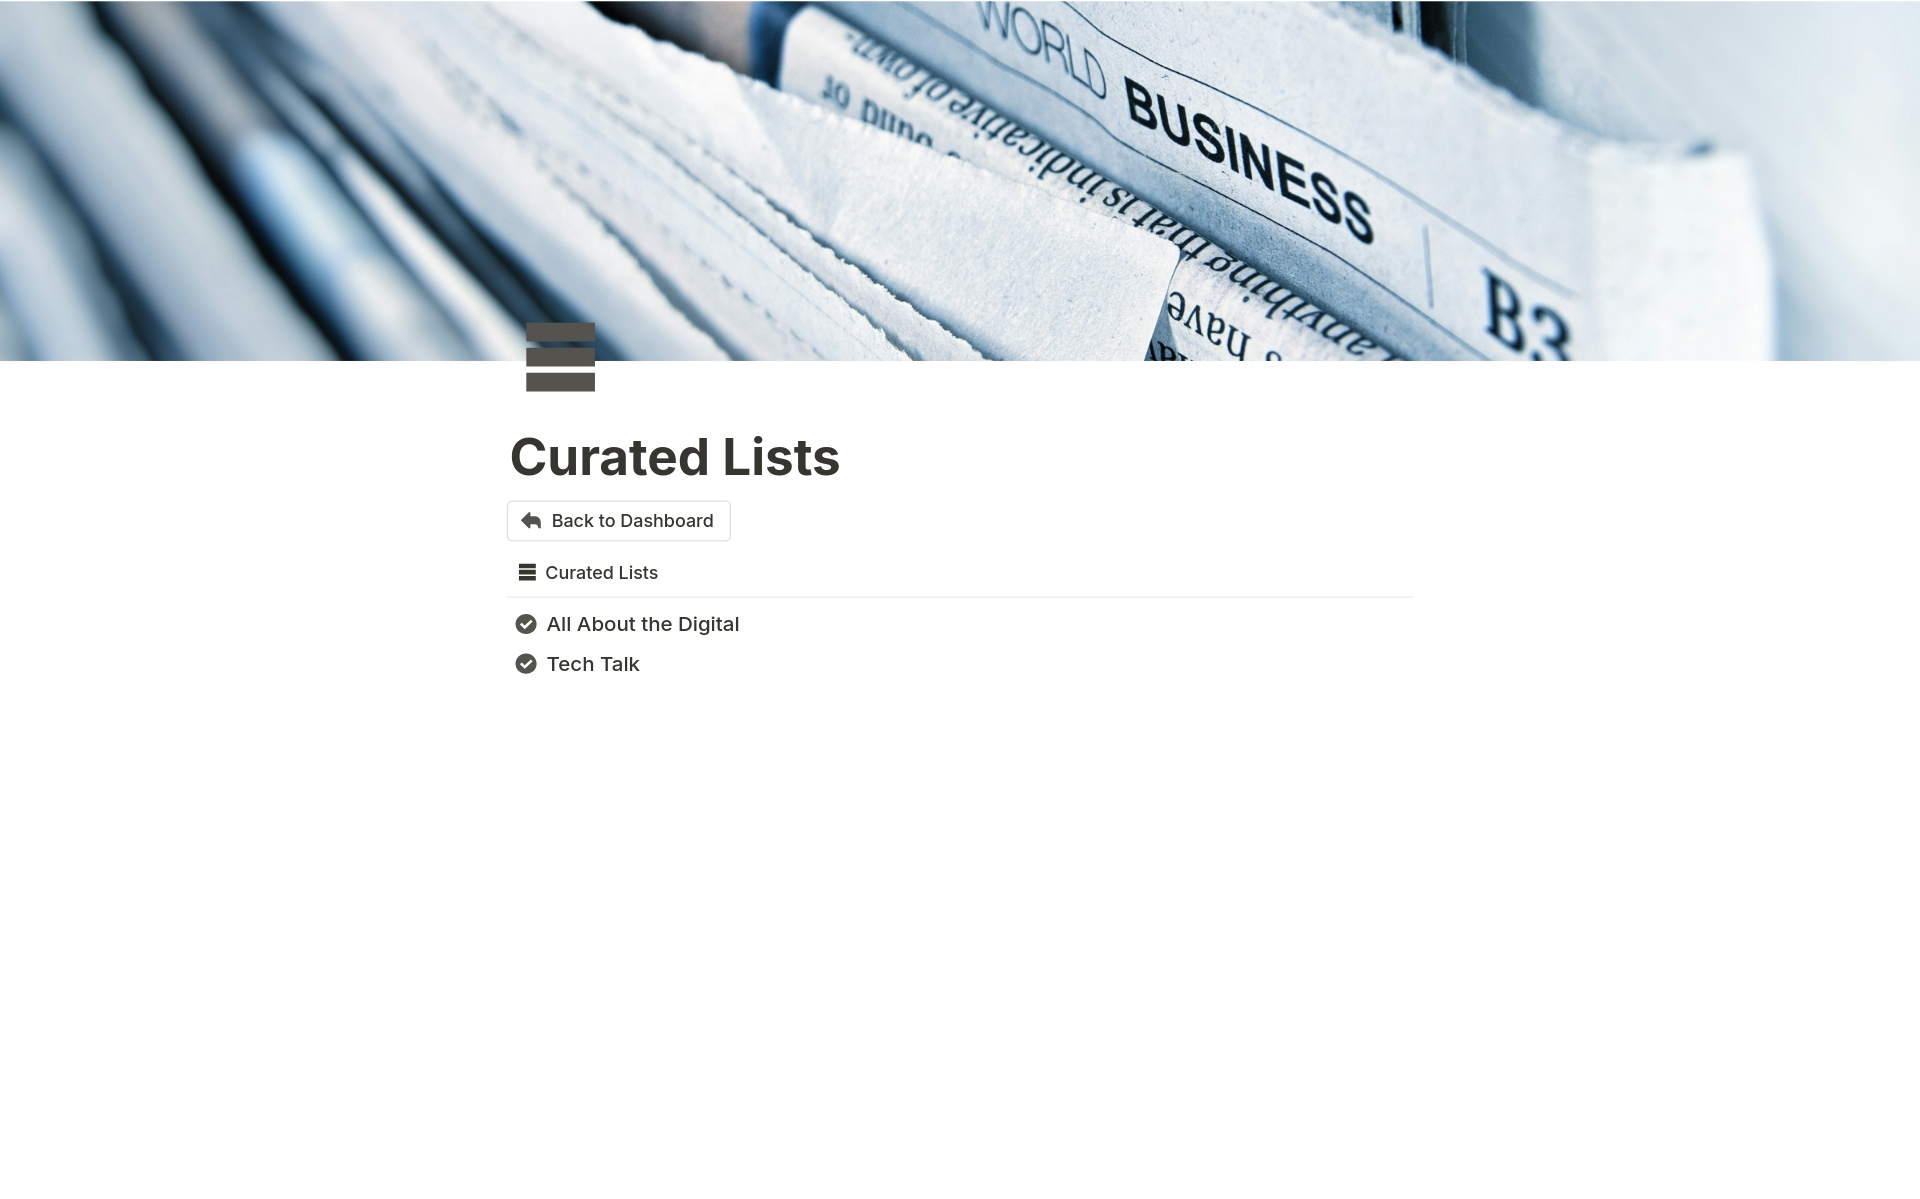 The Article Reading List Template is a digital article manager for the modern reader and curator.